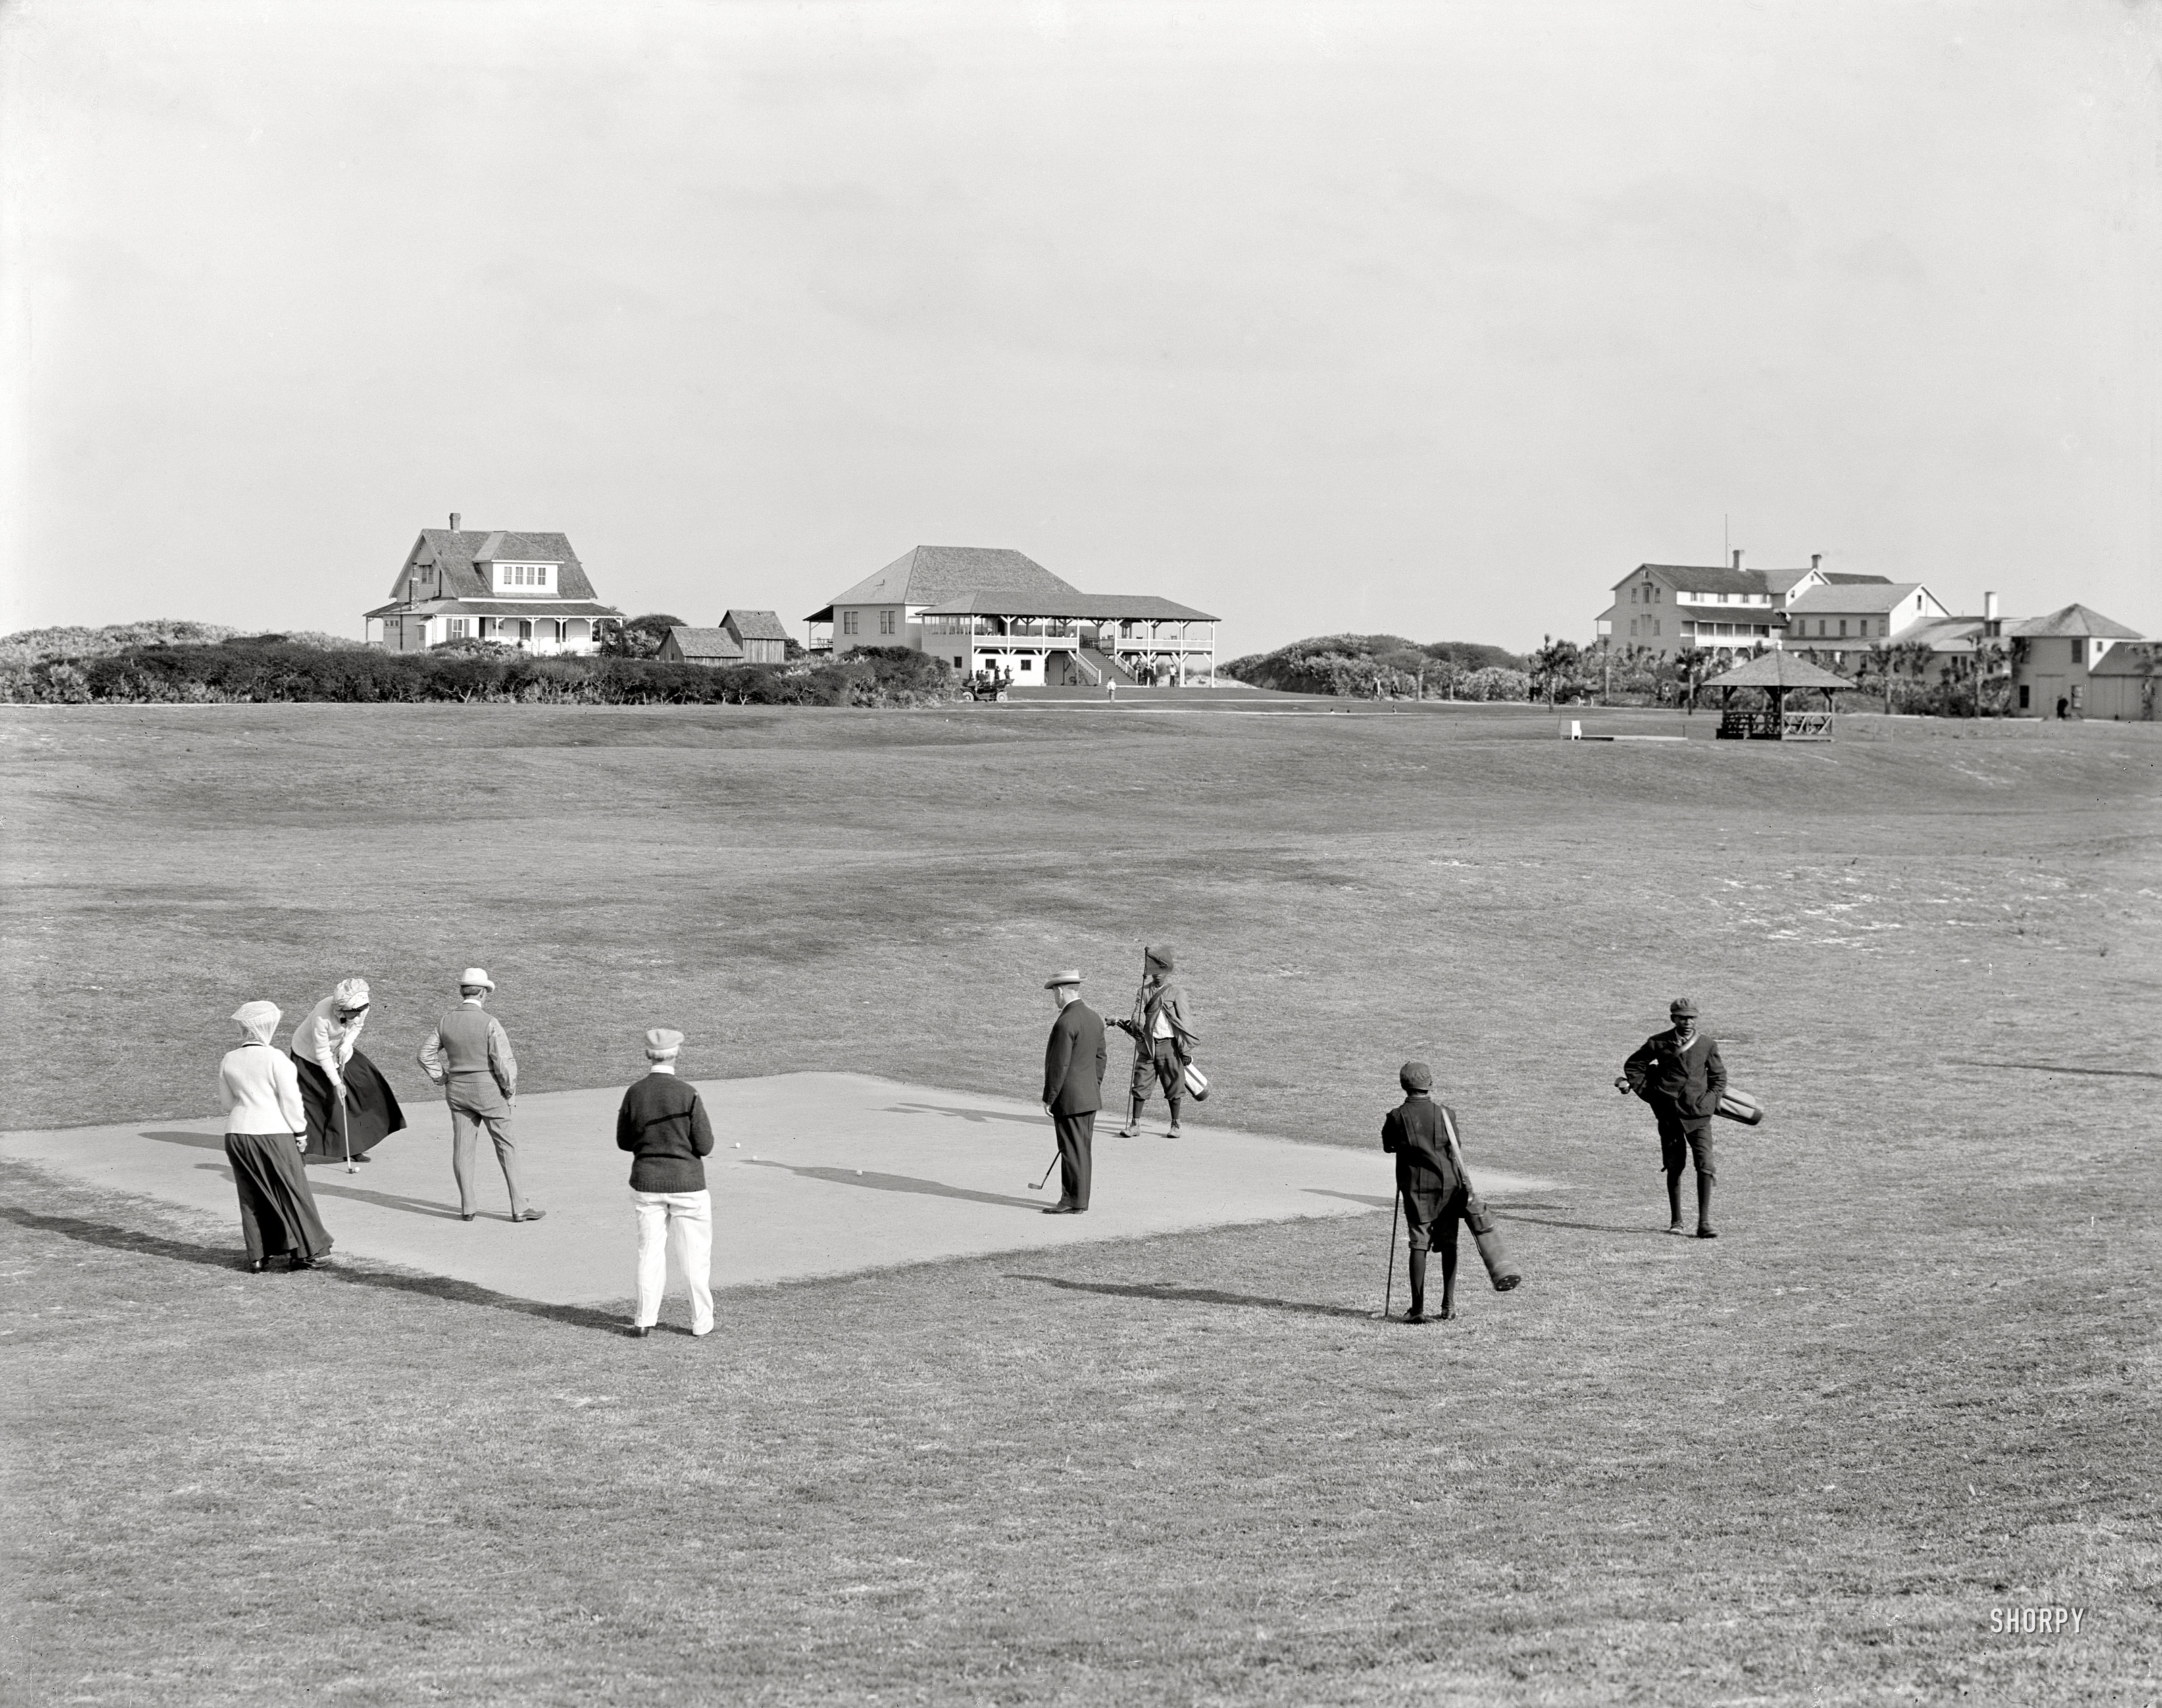 Circa 1910. "Ormond, Florida -- New golf links and club house." 8x10 inch dry plate glass negative, Detroit Publishing Company. View full size.